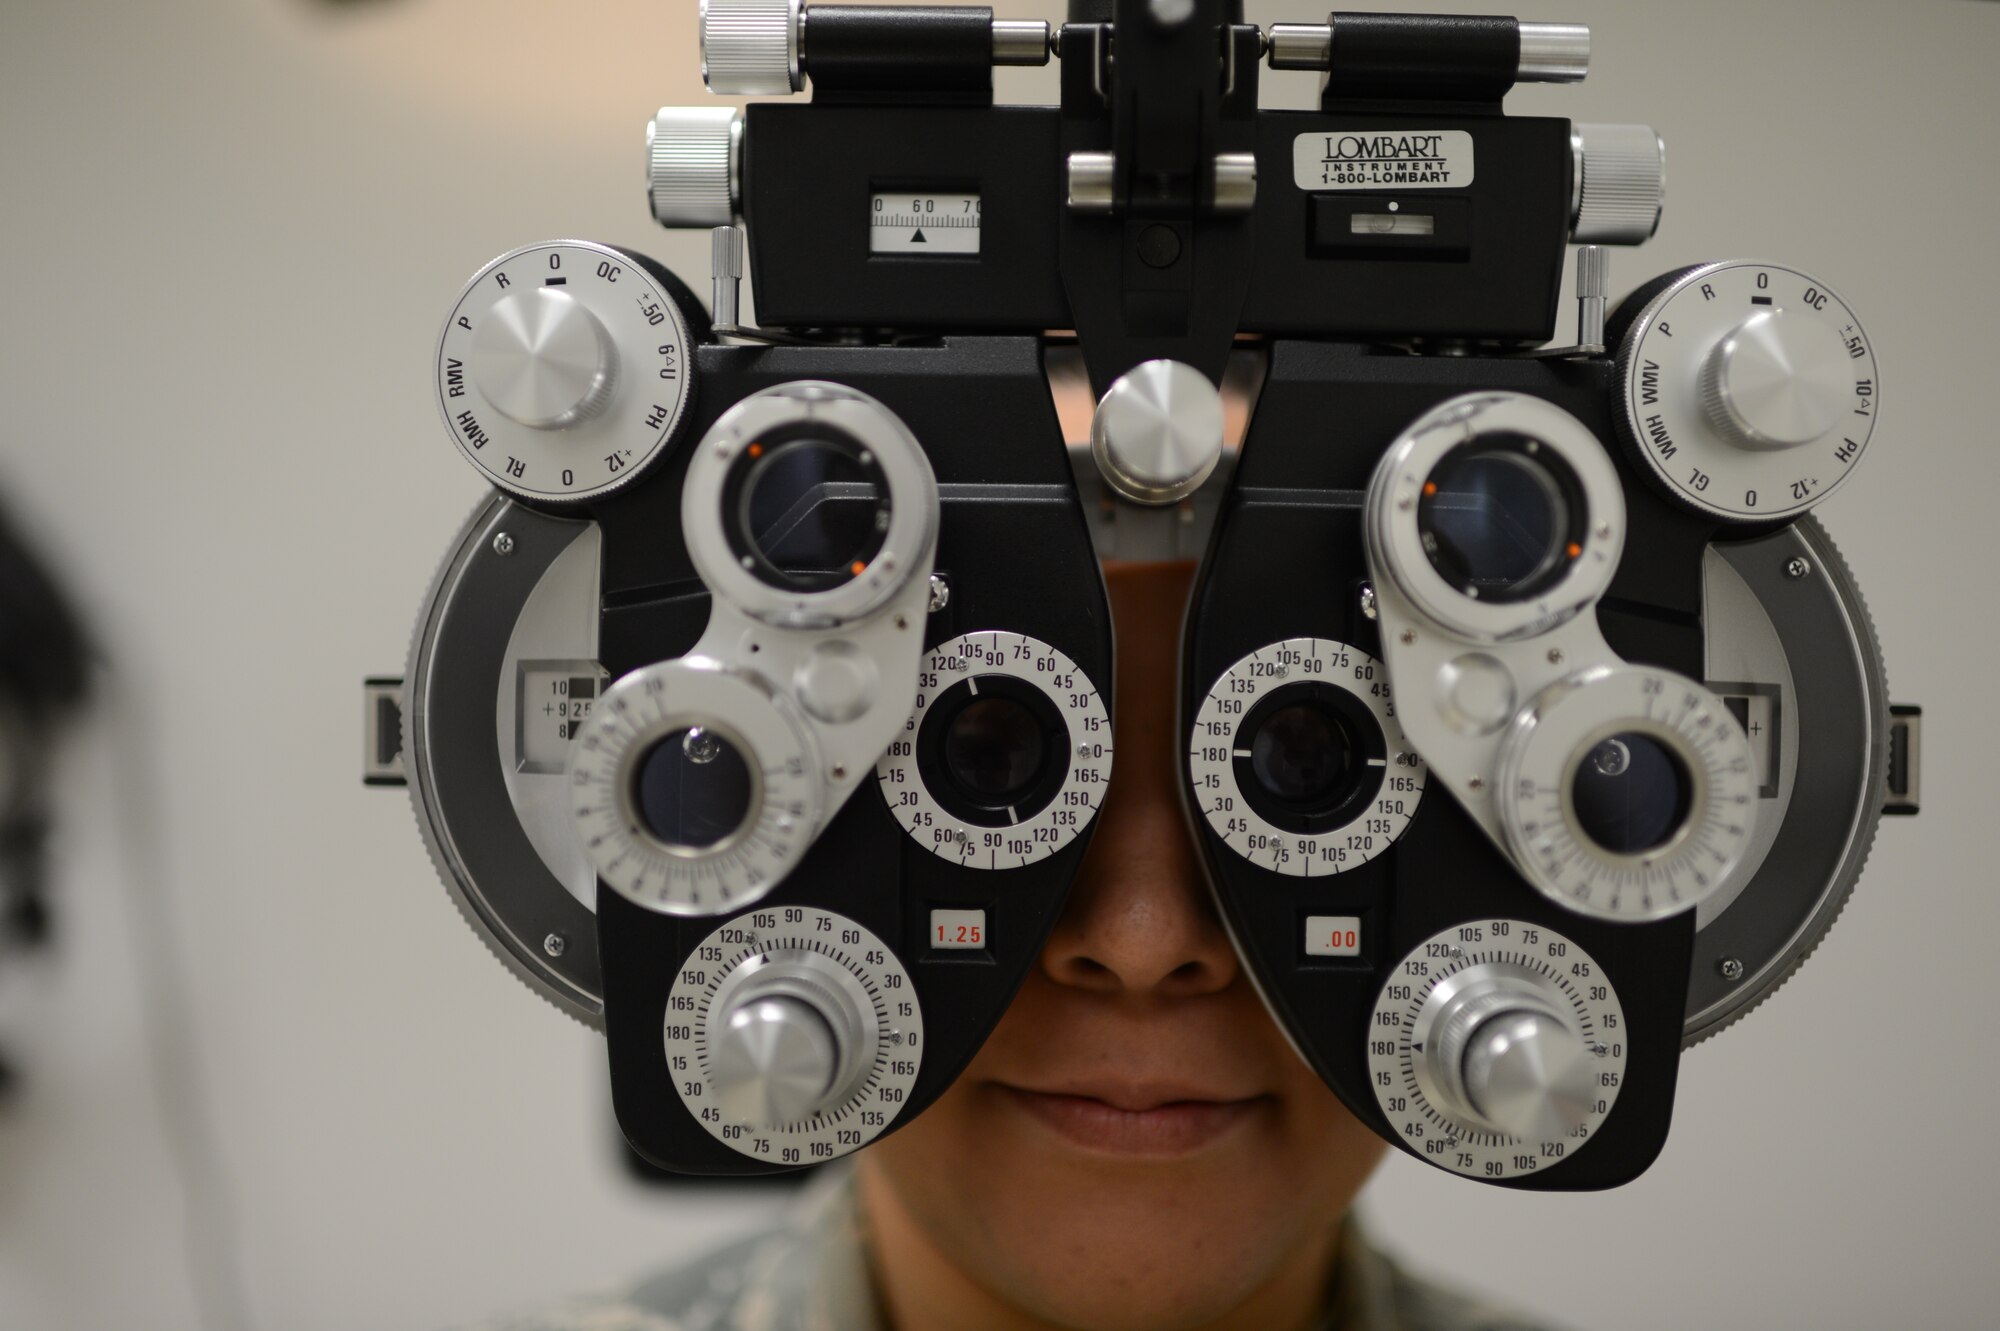 U.S. Air Force Senior Airman Ivonn Zepeda Chavez, 52nd Aerospace Medicine Squadron optometry technician from Wichita, Kan., looks through a phoropter at Spangdahlem Air Base, Germany, March 5, 2014. Optometry technicians use equipment like the phoropter to determine a patient’s prescription. (U.S. Air Force photo by Senior Airman Gustavo Castillo/Released)